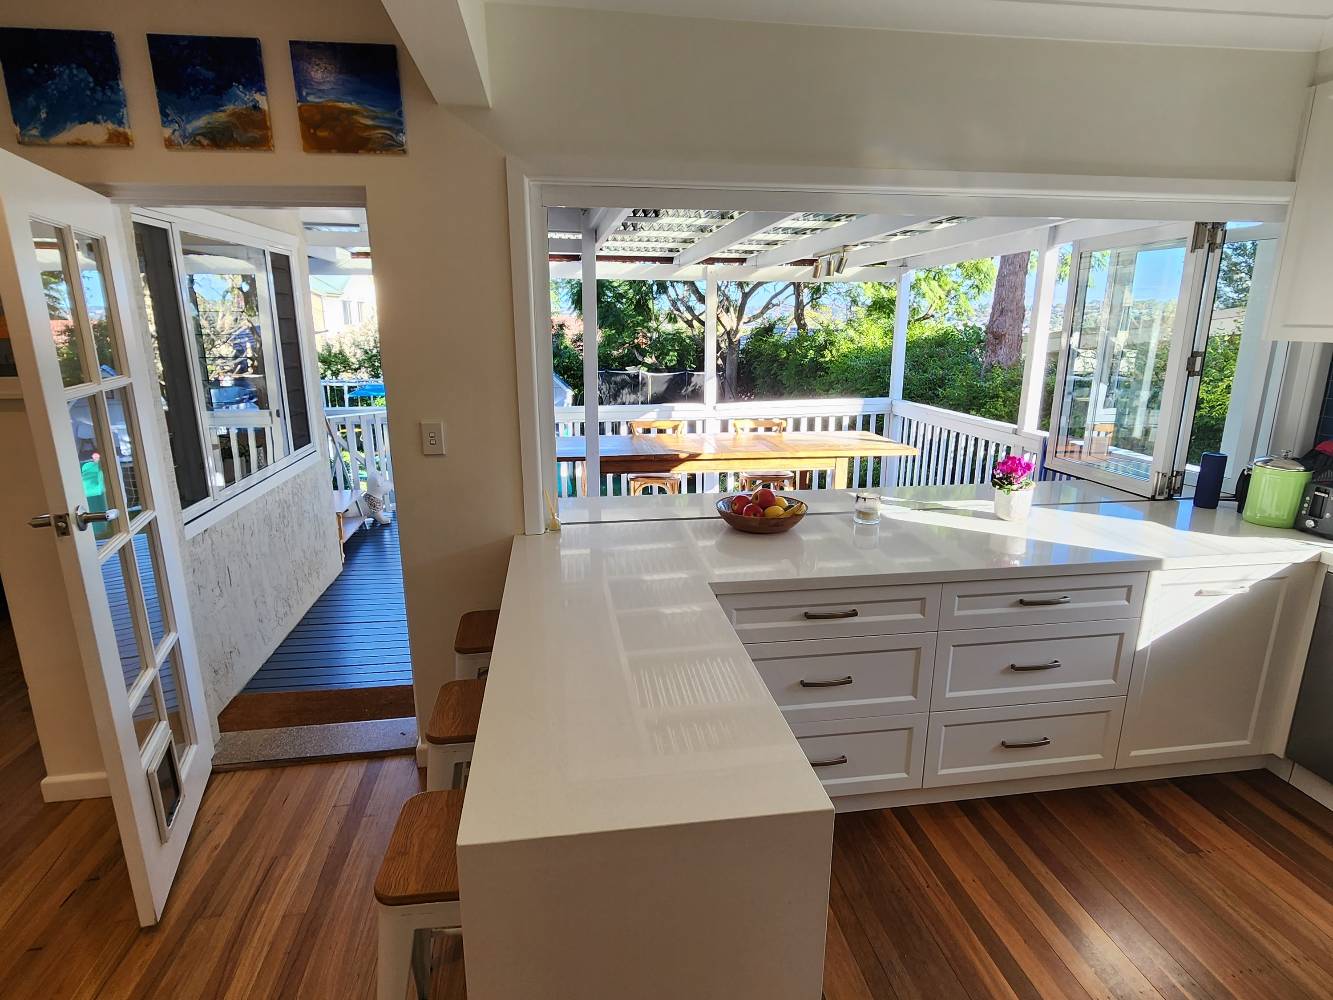 Open up the kitchen windows onto the deck